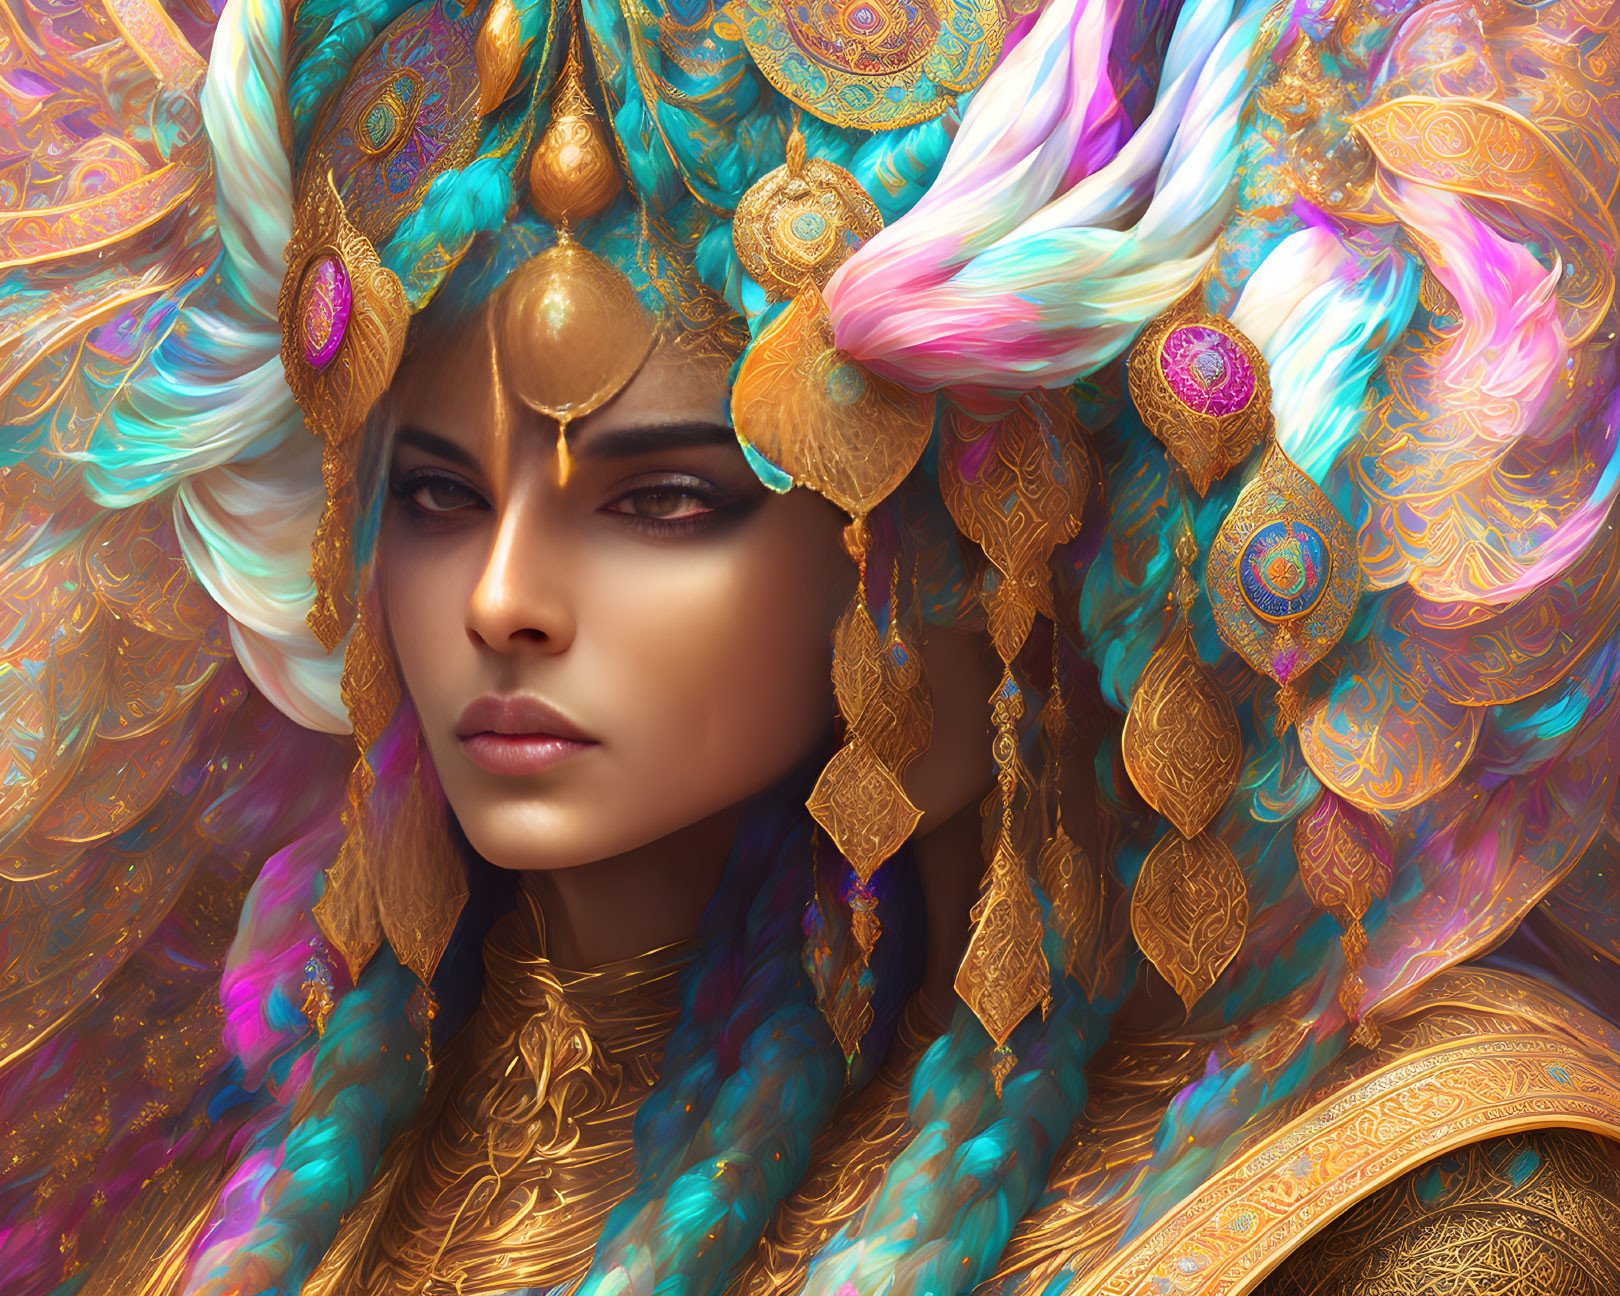 Digital Artwork: Woman with Golden Headdress and Turquoise Feathers